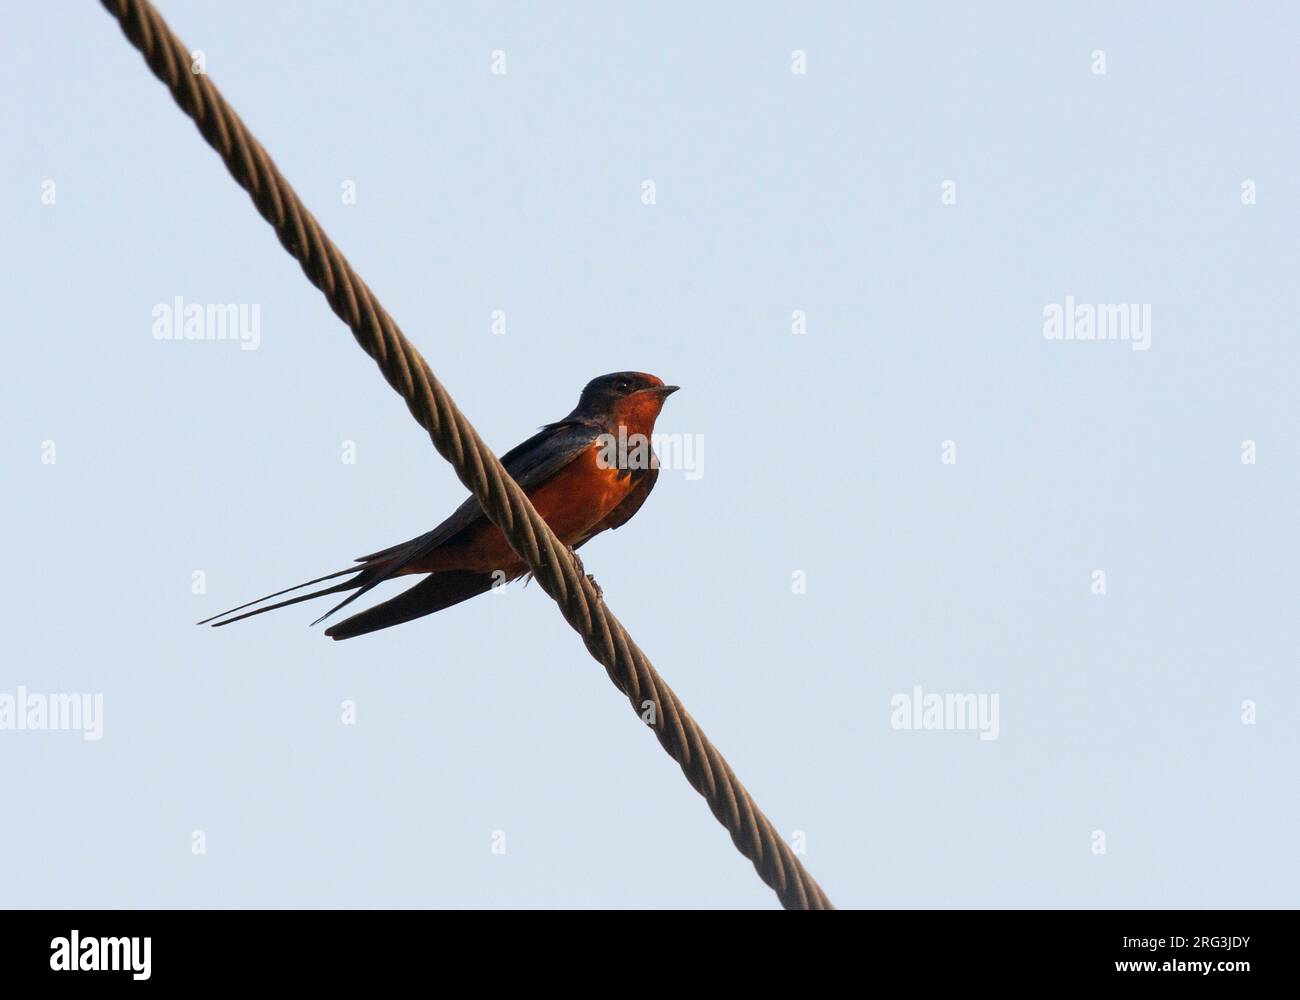 Adult Egyptian Barn Swallow (Hirundo rustica savignii) resting on a power line in ancient Luxor. Stock Photo